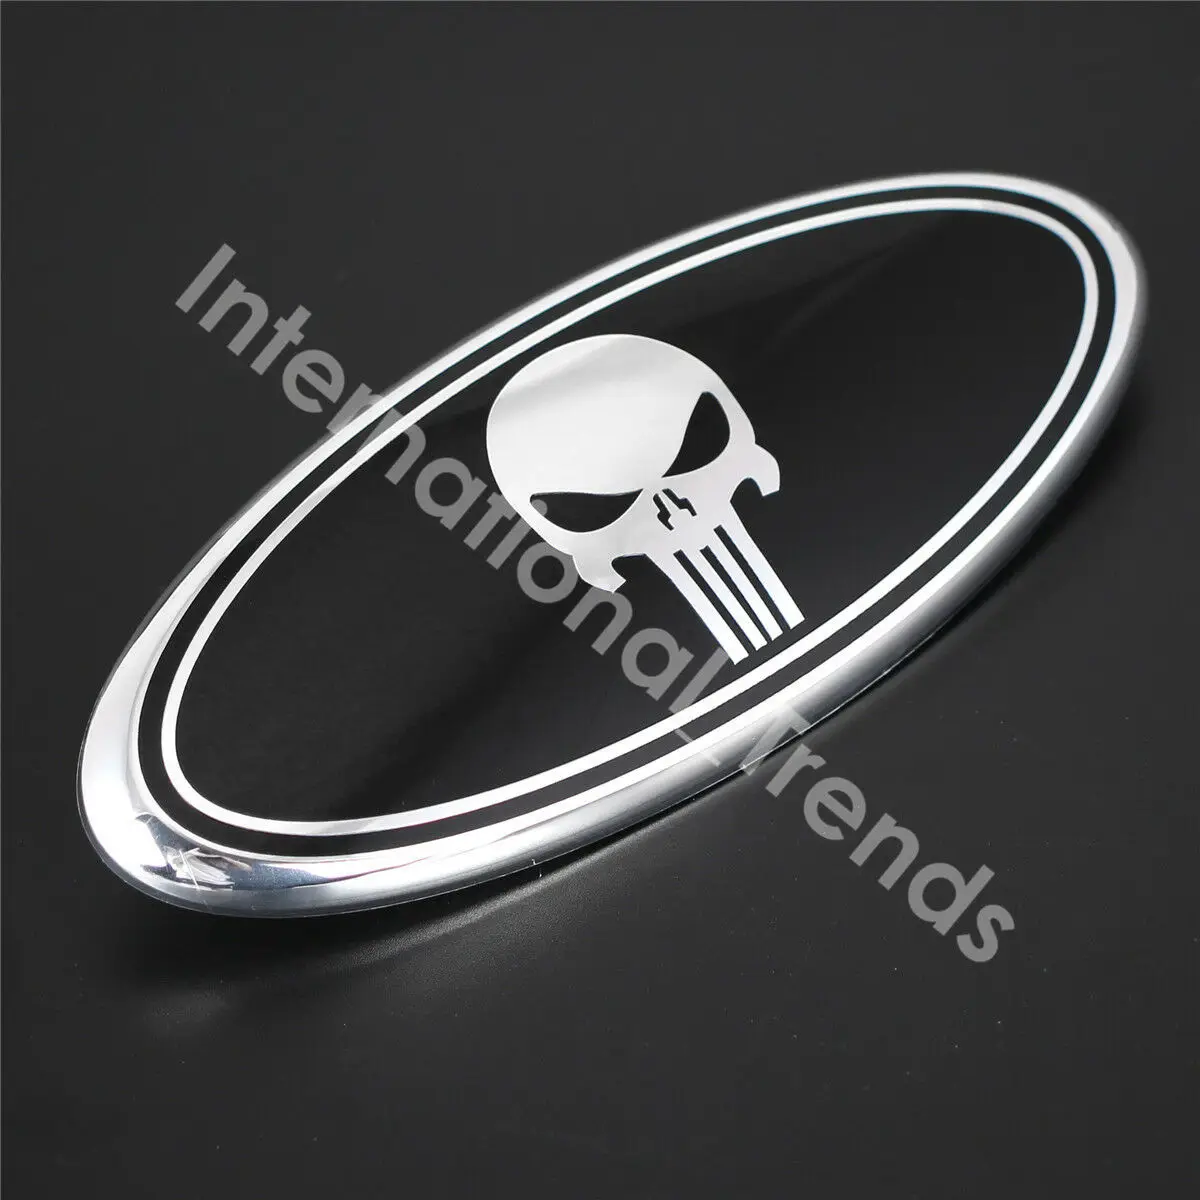 

1pc Skull Head 9 Inch Front Grille Tailgate Oval Emblem for 2004-2014 F150 F-250 F-350 Explorer Edge EXPEDITION